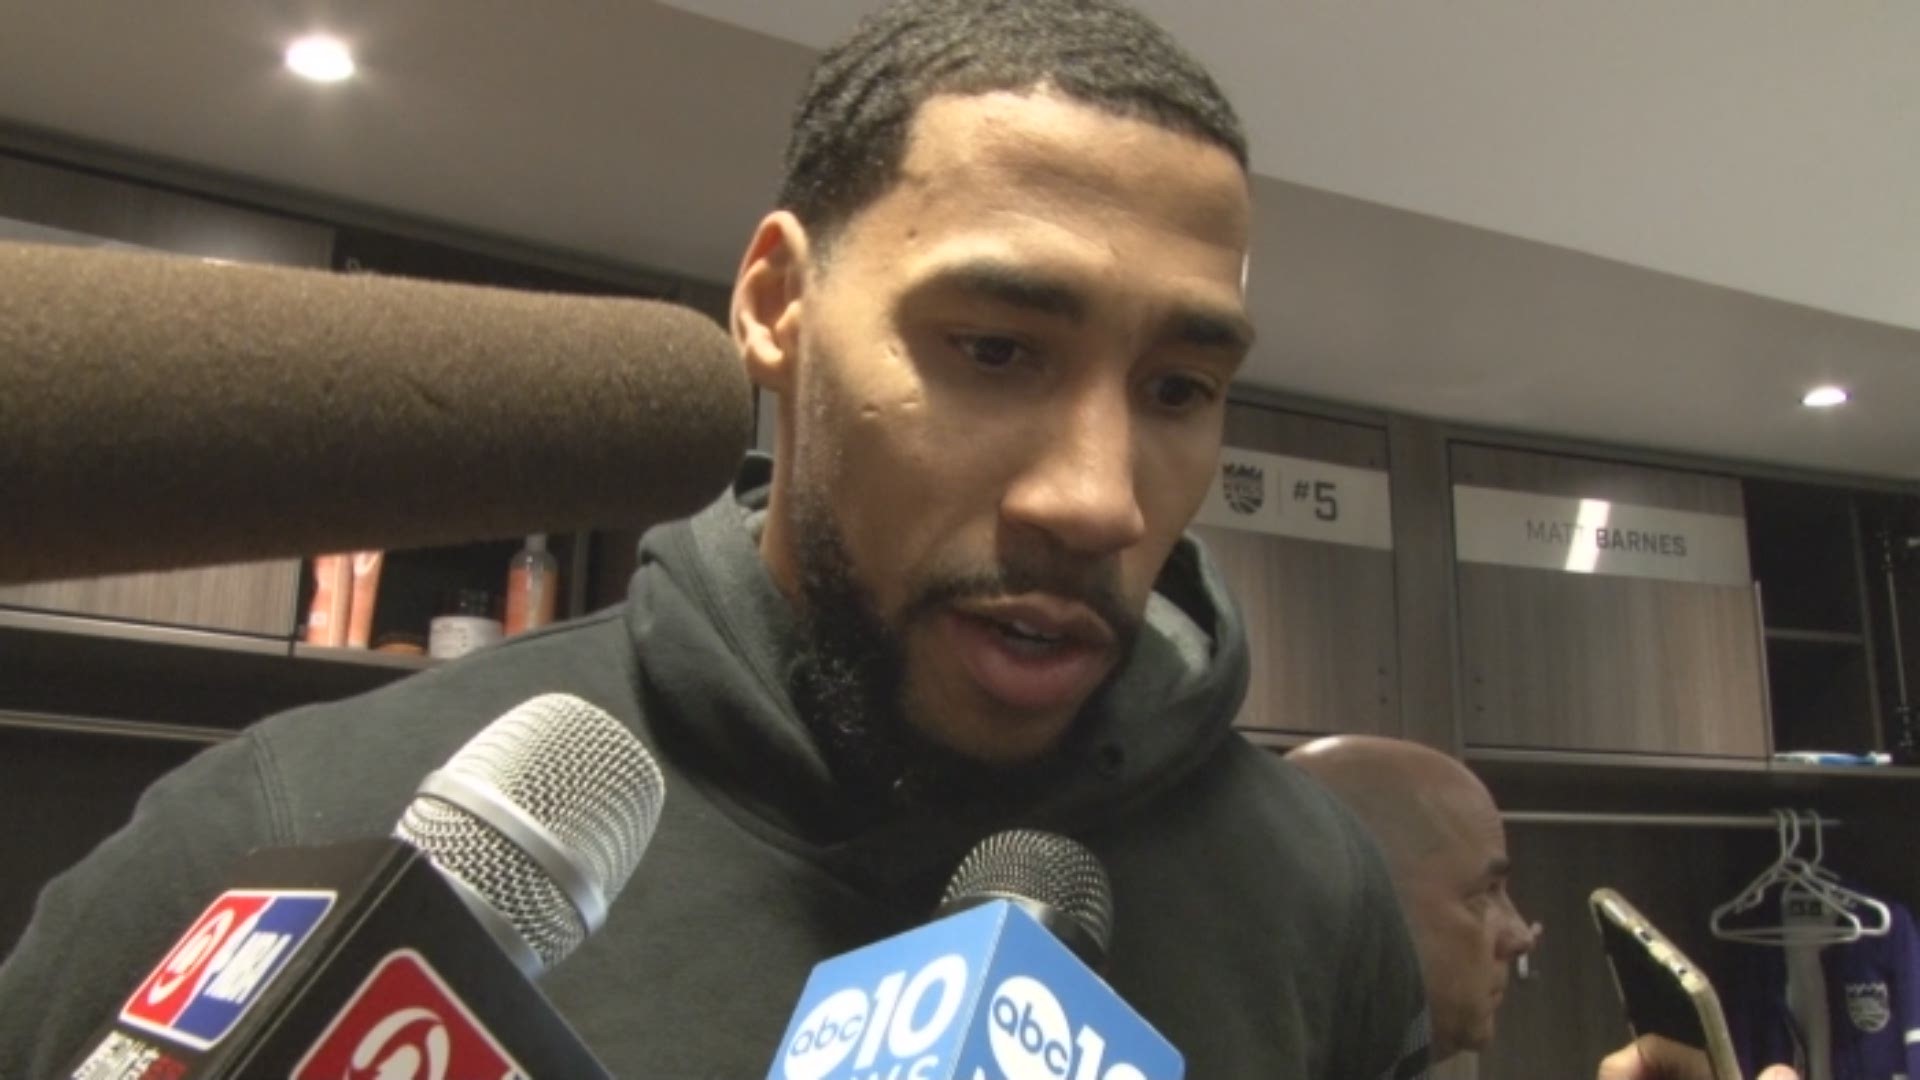 Sacramento Kings guard/forward Garrett Temple talks about seeing his teammate Rudy Gay carried-off the floor after suffering an injury to his Achilles in Wedensday's loss at home to the Indiana Pacers.